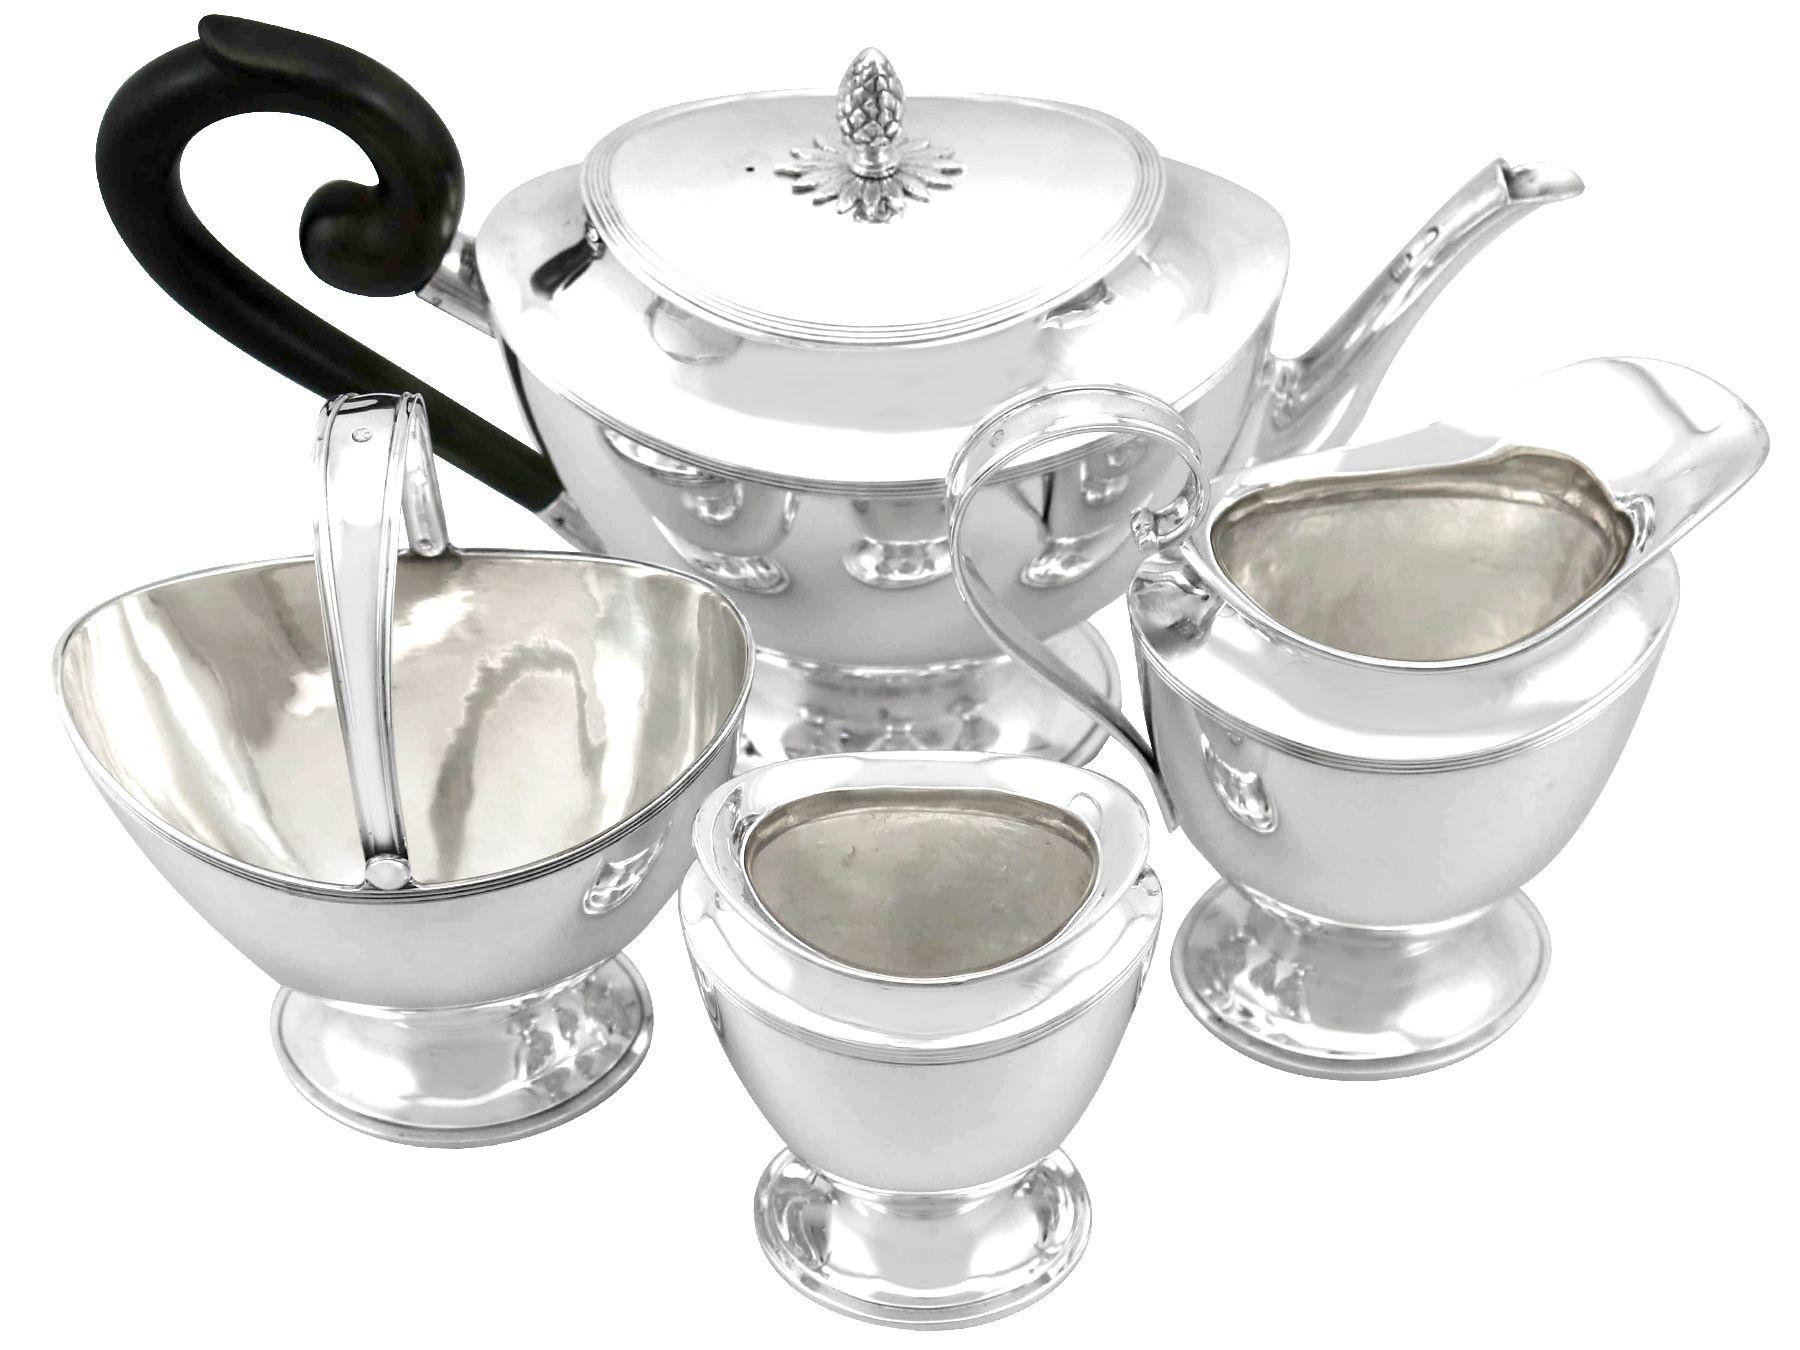 An exceptional, fine and impressive antique Dutch silver four piece tea set; part of our silver teaware collection

This exceptional antique Dutch silver tea and coffee set consists of a teapot, cream jug, sugar basket and slop bowl.

Each piece